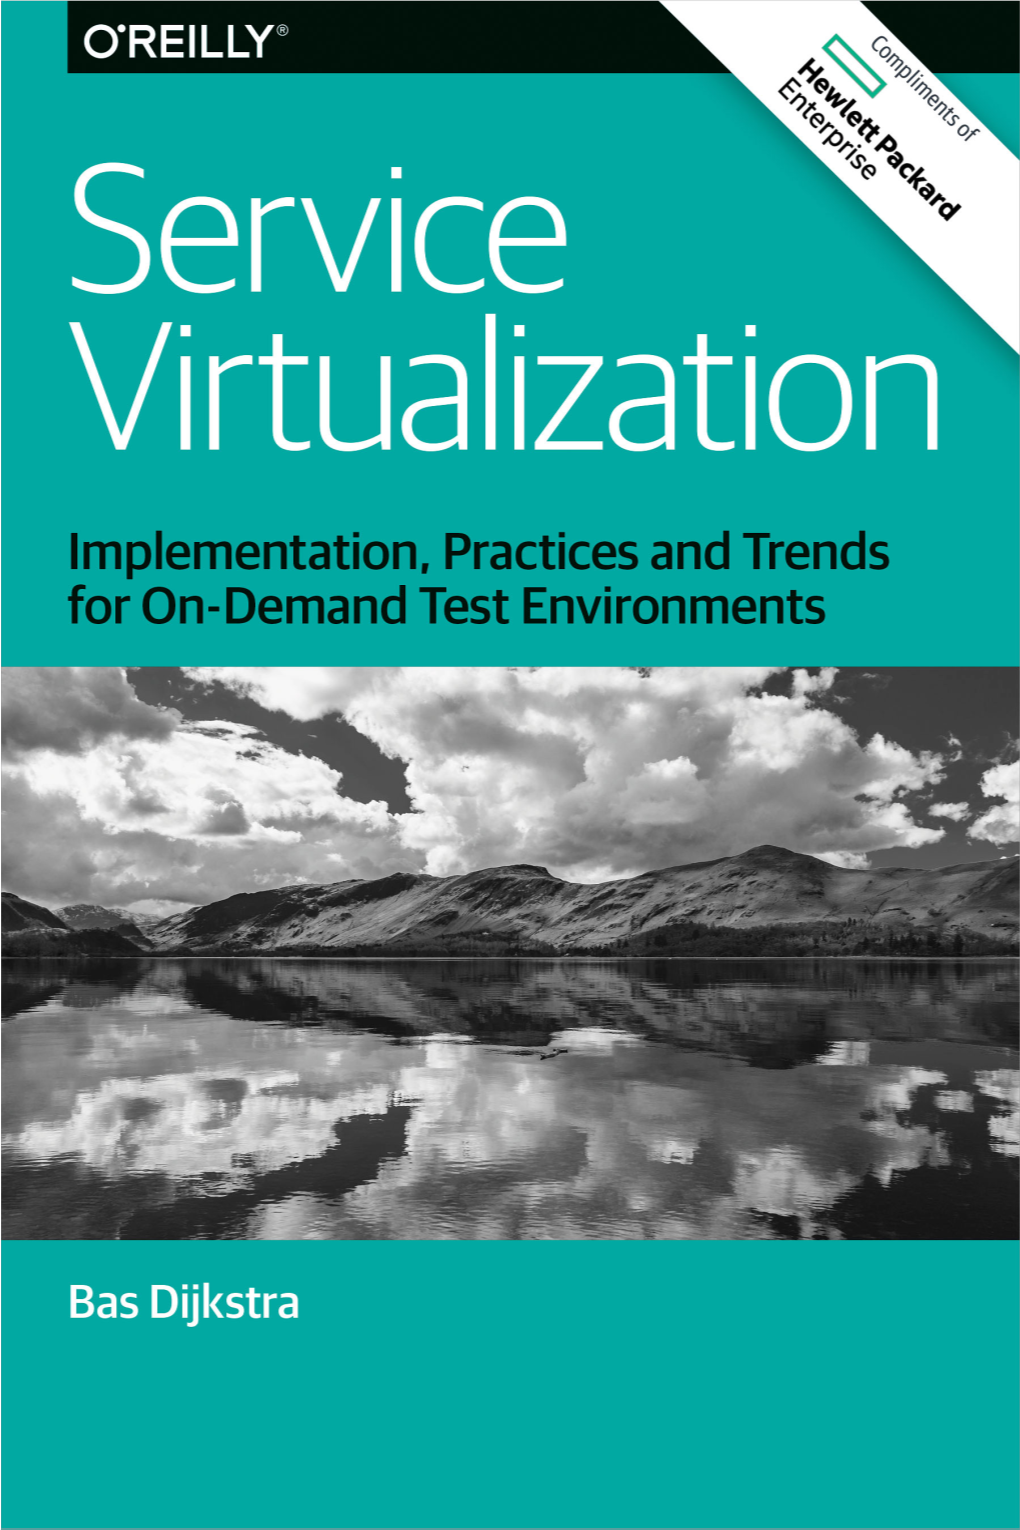 Service Virtualization Implementation, Practices, and Trends for On-Demand Test Environments